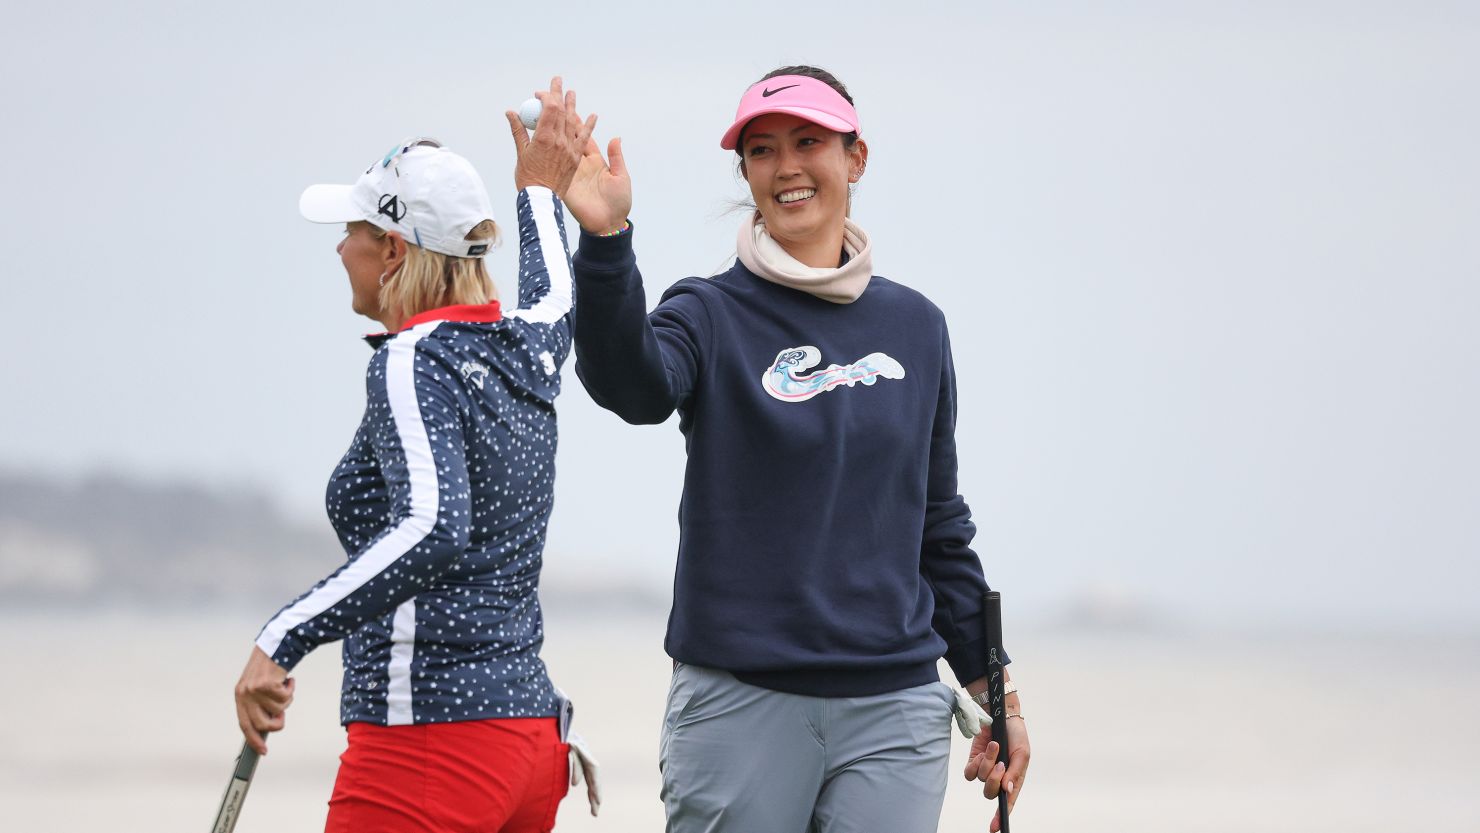 Michelle Wie West (R) of the United States celebrates her putt for par with Annika Sorenstam (L) of Sweden on the 18th green during the second round of the 78th U.S. Women's Open at Pebble Beach Golf Links on July 07, 2023 in Pebble Beach, California.